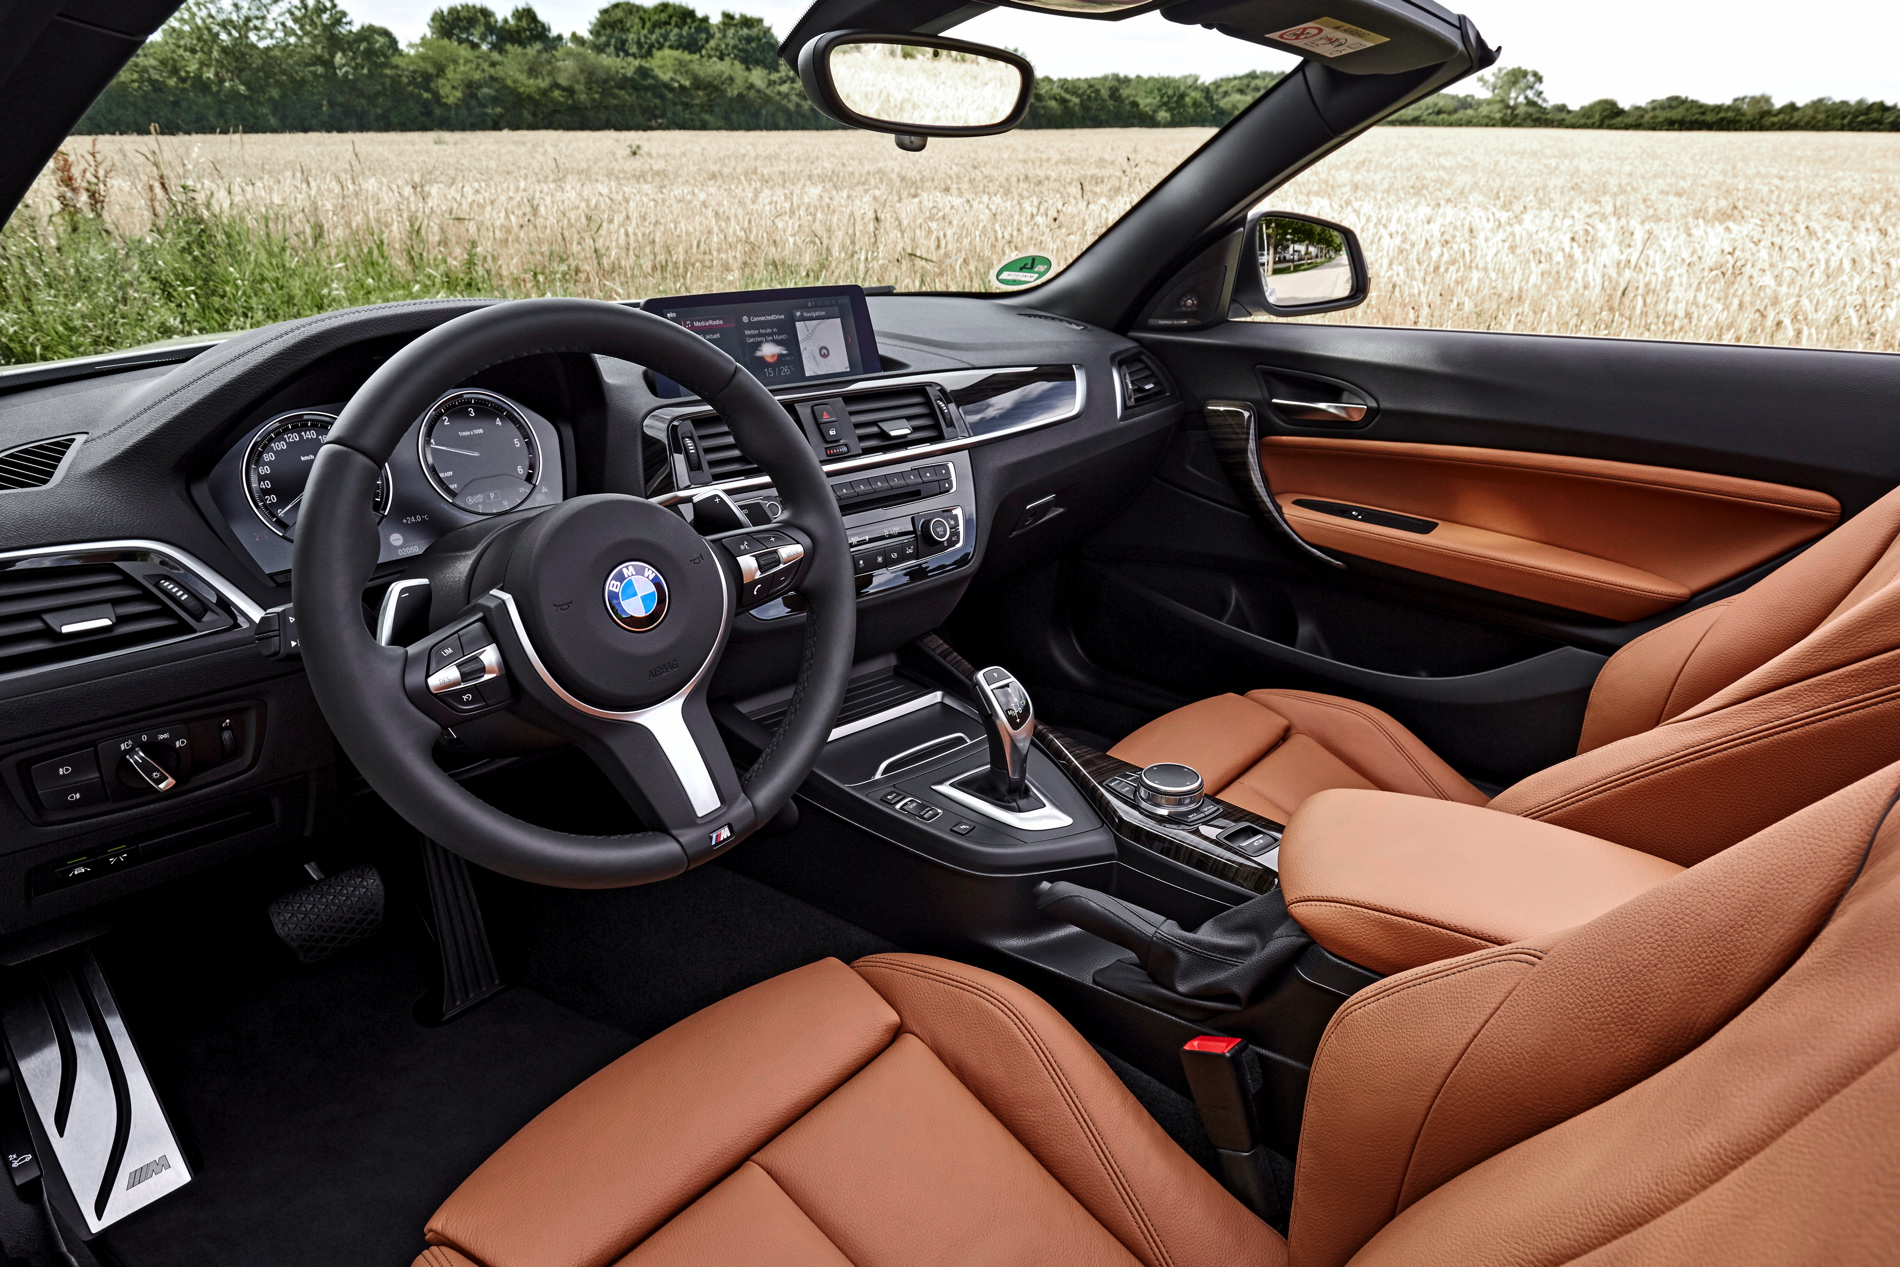 Know Your Leather: Here Are The Different Types Of BMW Leather Options ...